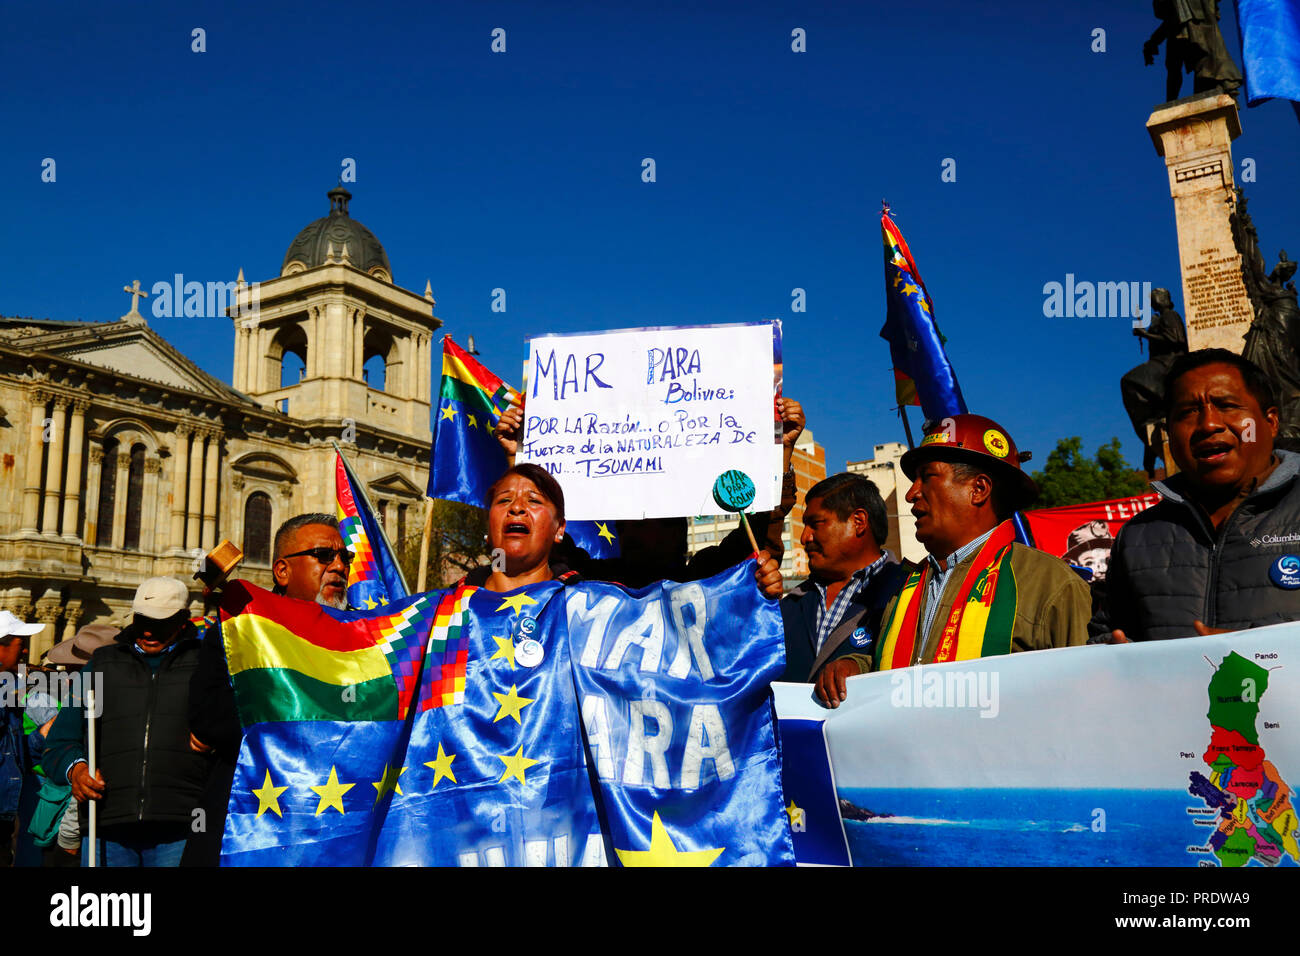 La Paz, Bolivia, 1st October 2018. People chant "Mar Para Bolivia / Sea For Bolivia" before the reading of the ruling for the case "Obligation to Negotiate Access to the Pacific Ocean (Bolivia v. Chile)" at the International Court of Justice in The Hague. Bolivia presented the case to the ICJ in 2013; Bolivia lost its coastal Litoral province to Chile during the War of the Pacific (1879-1884) and previous negotiations have made no progress from Bolivia's viewpoint. Credit: James Brunker/Alamy Live News Stock Photo